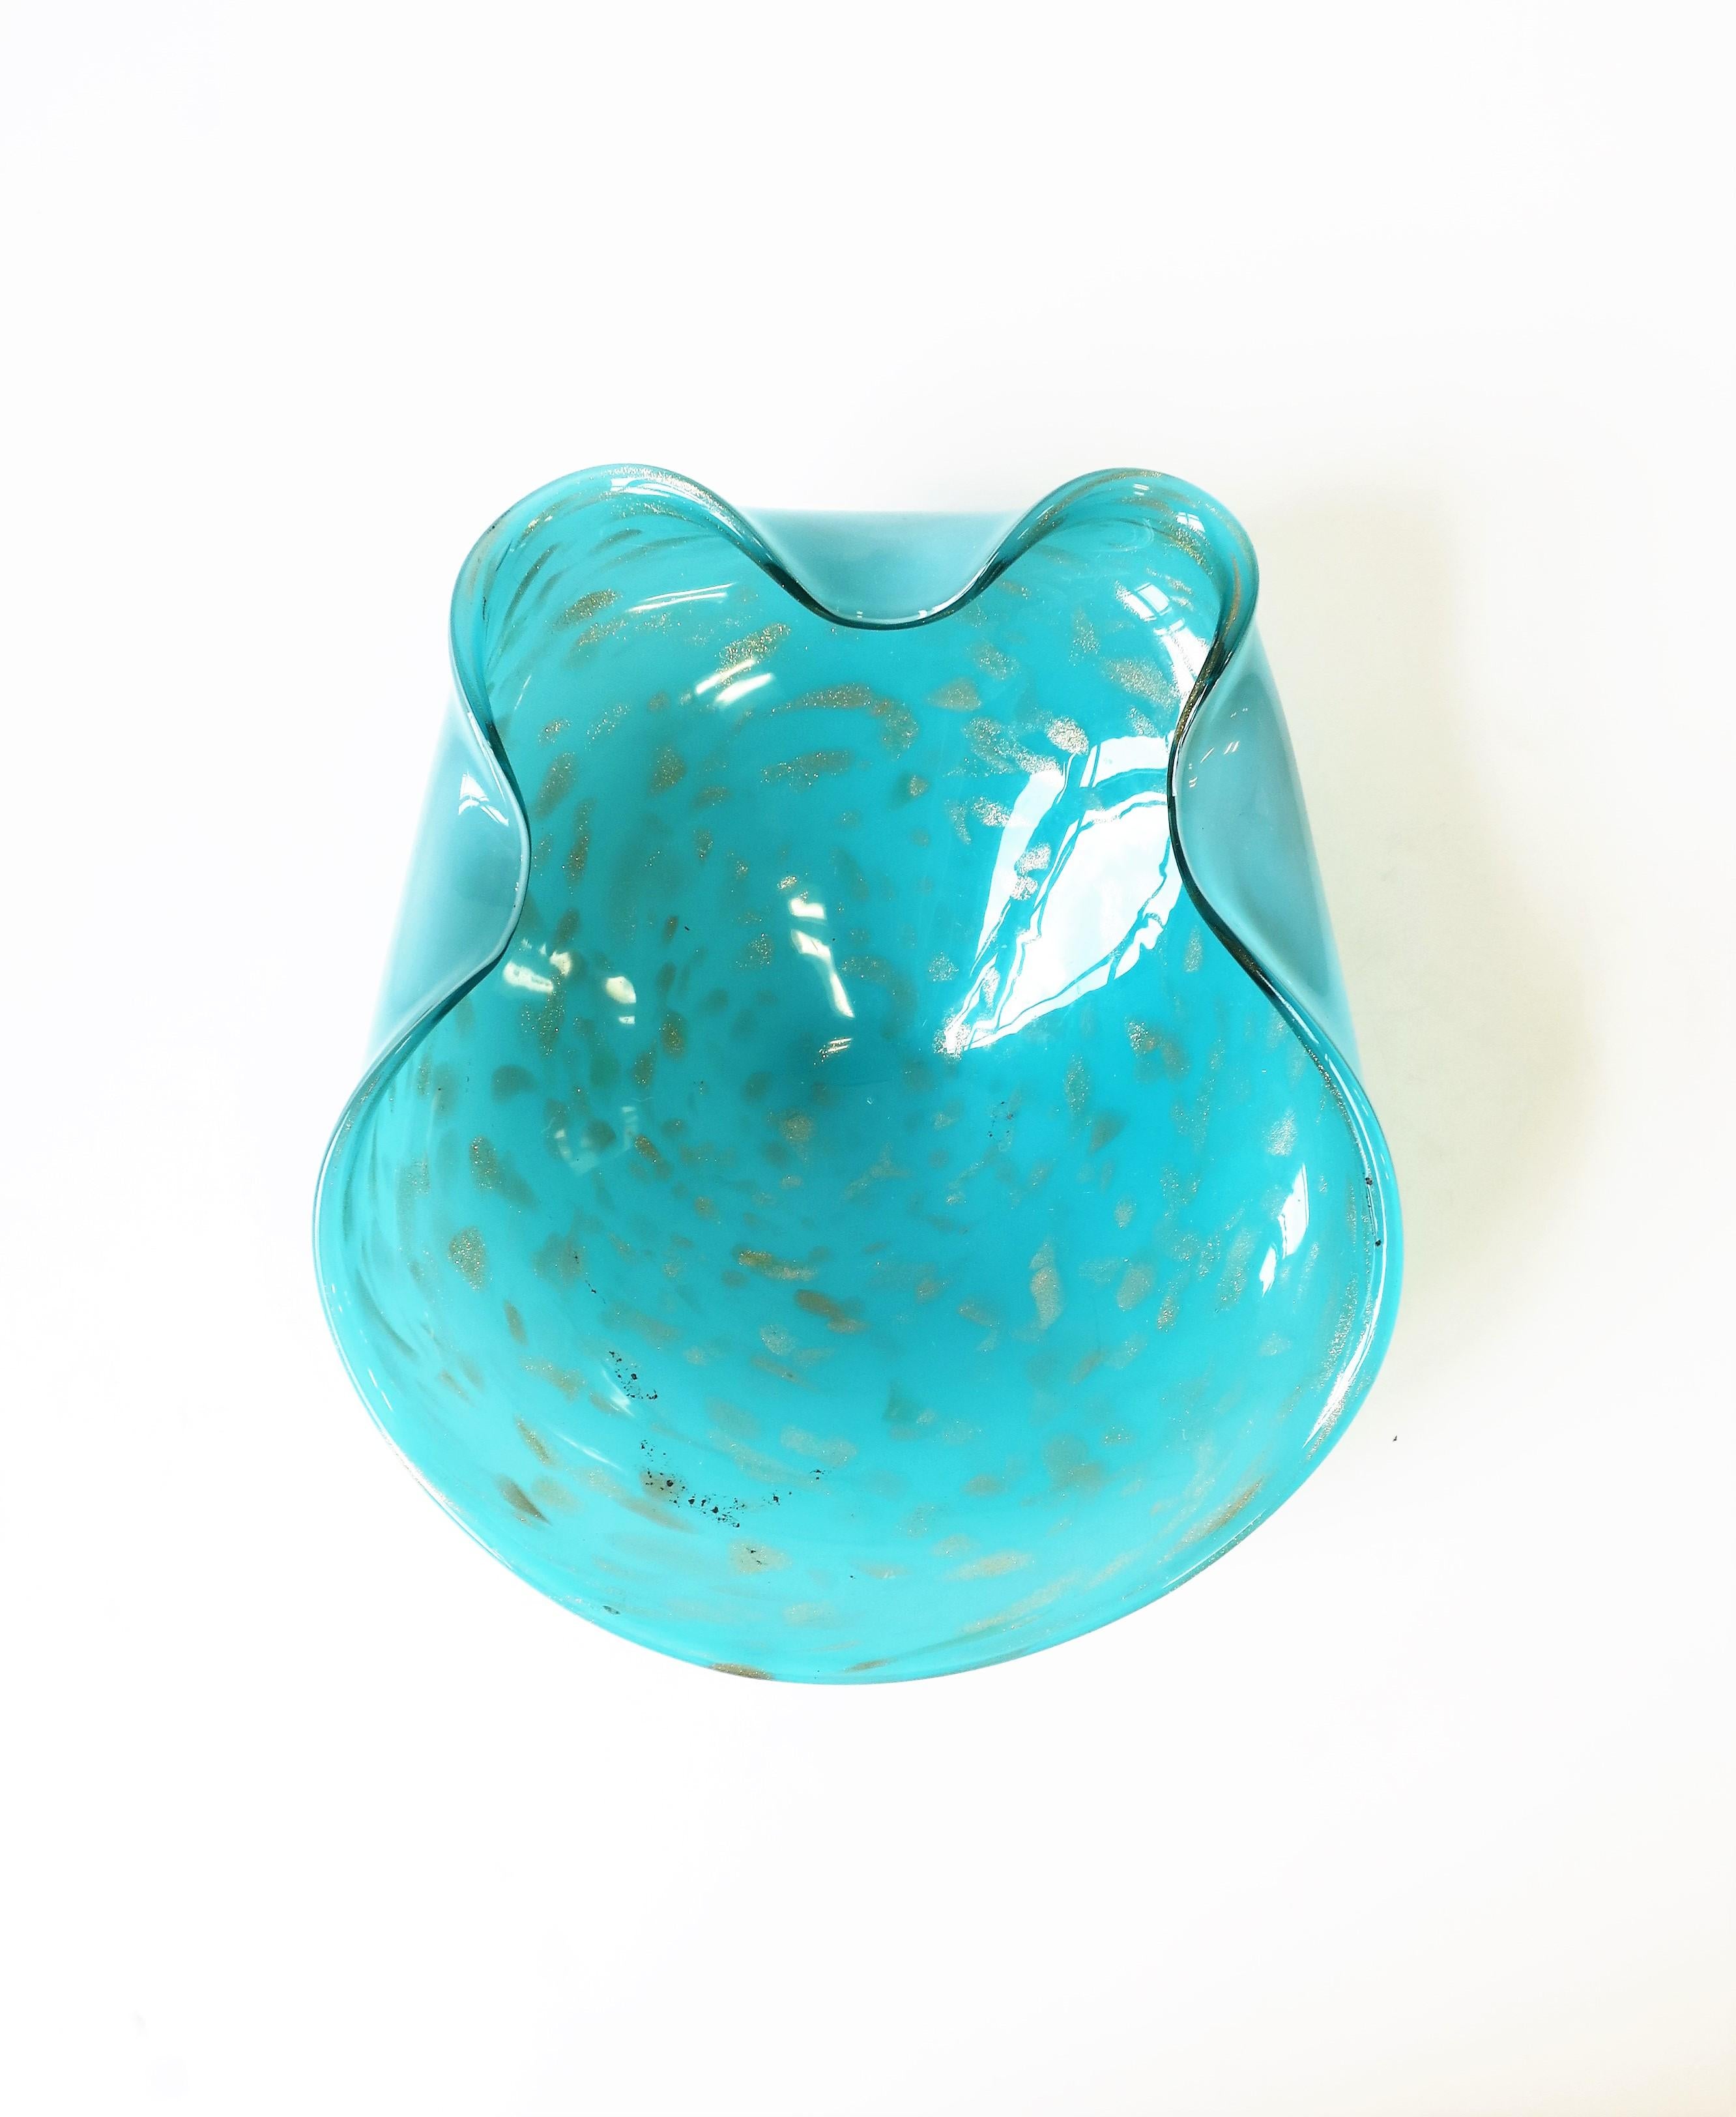 A beautiful and substantial Italian Murano art glass bowl in Caribbean/turquoise/azure blue with shimmering copper art glass, Midcentury Modern period, circa mid-20th century, 1960s, Italy. Great as a standalone piece or as a catchall/vide-poche.